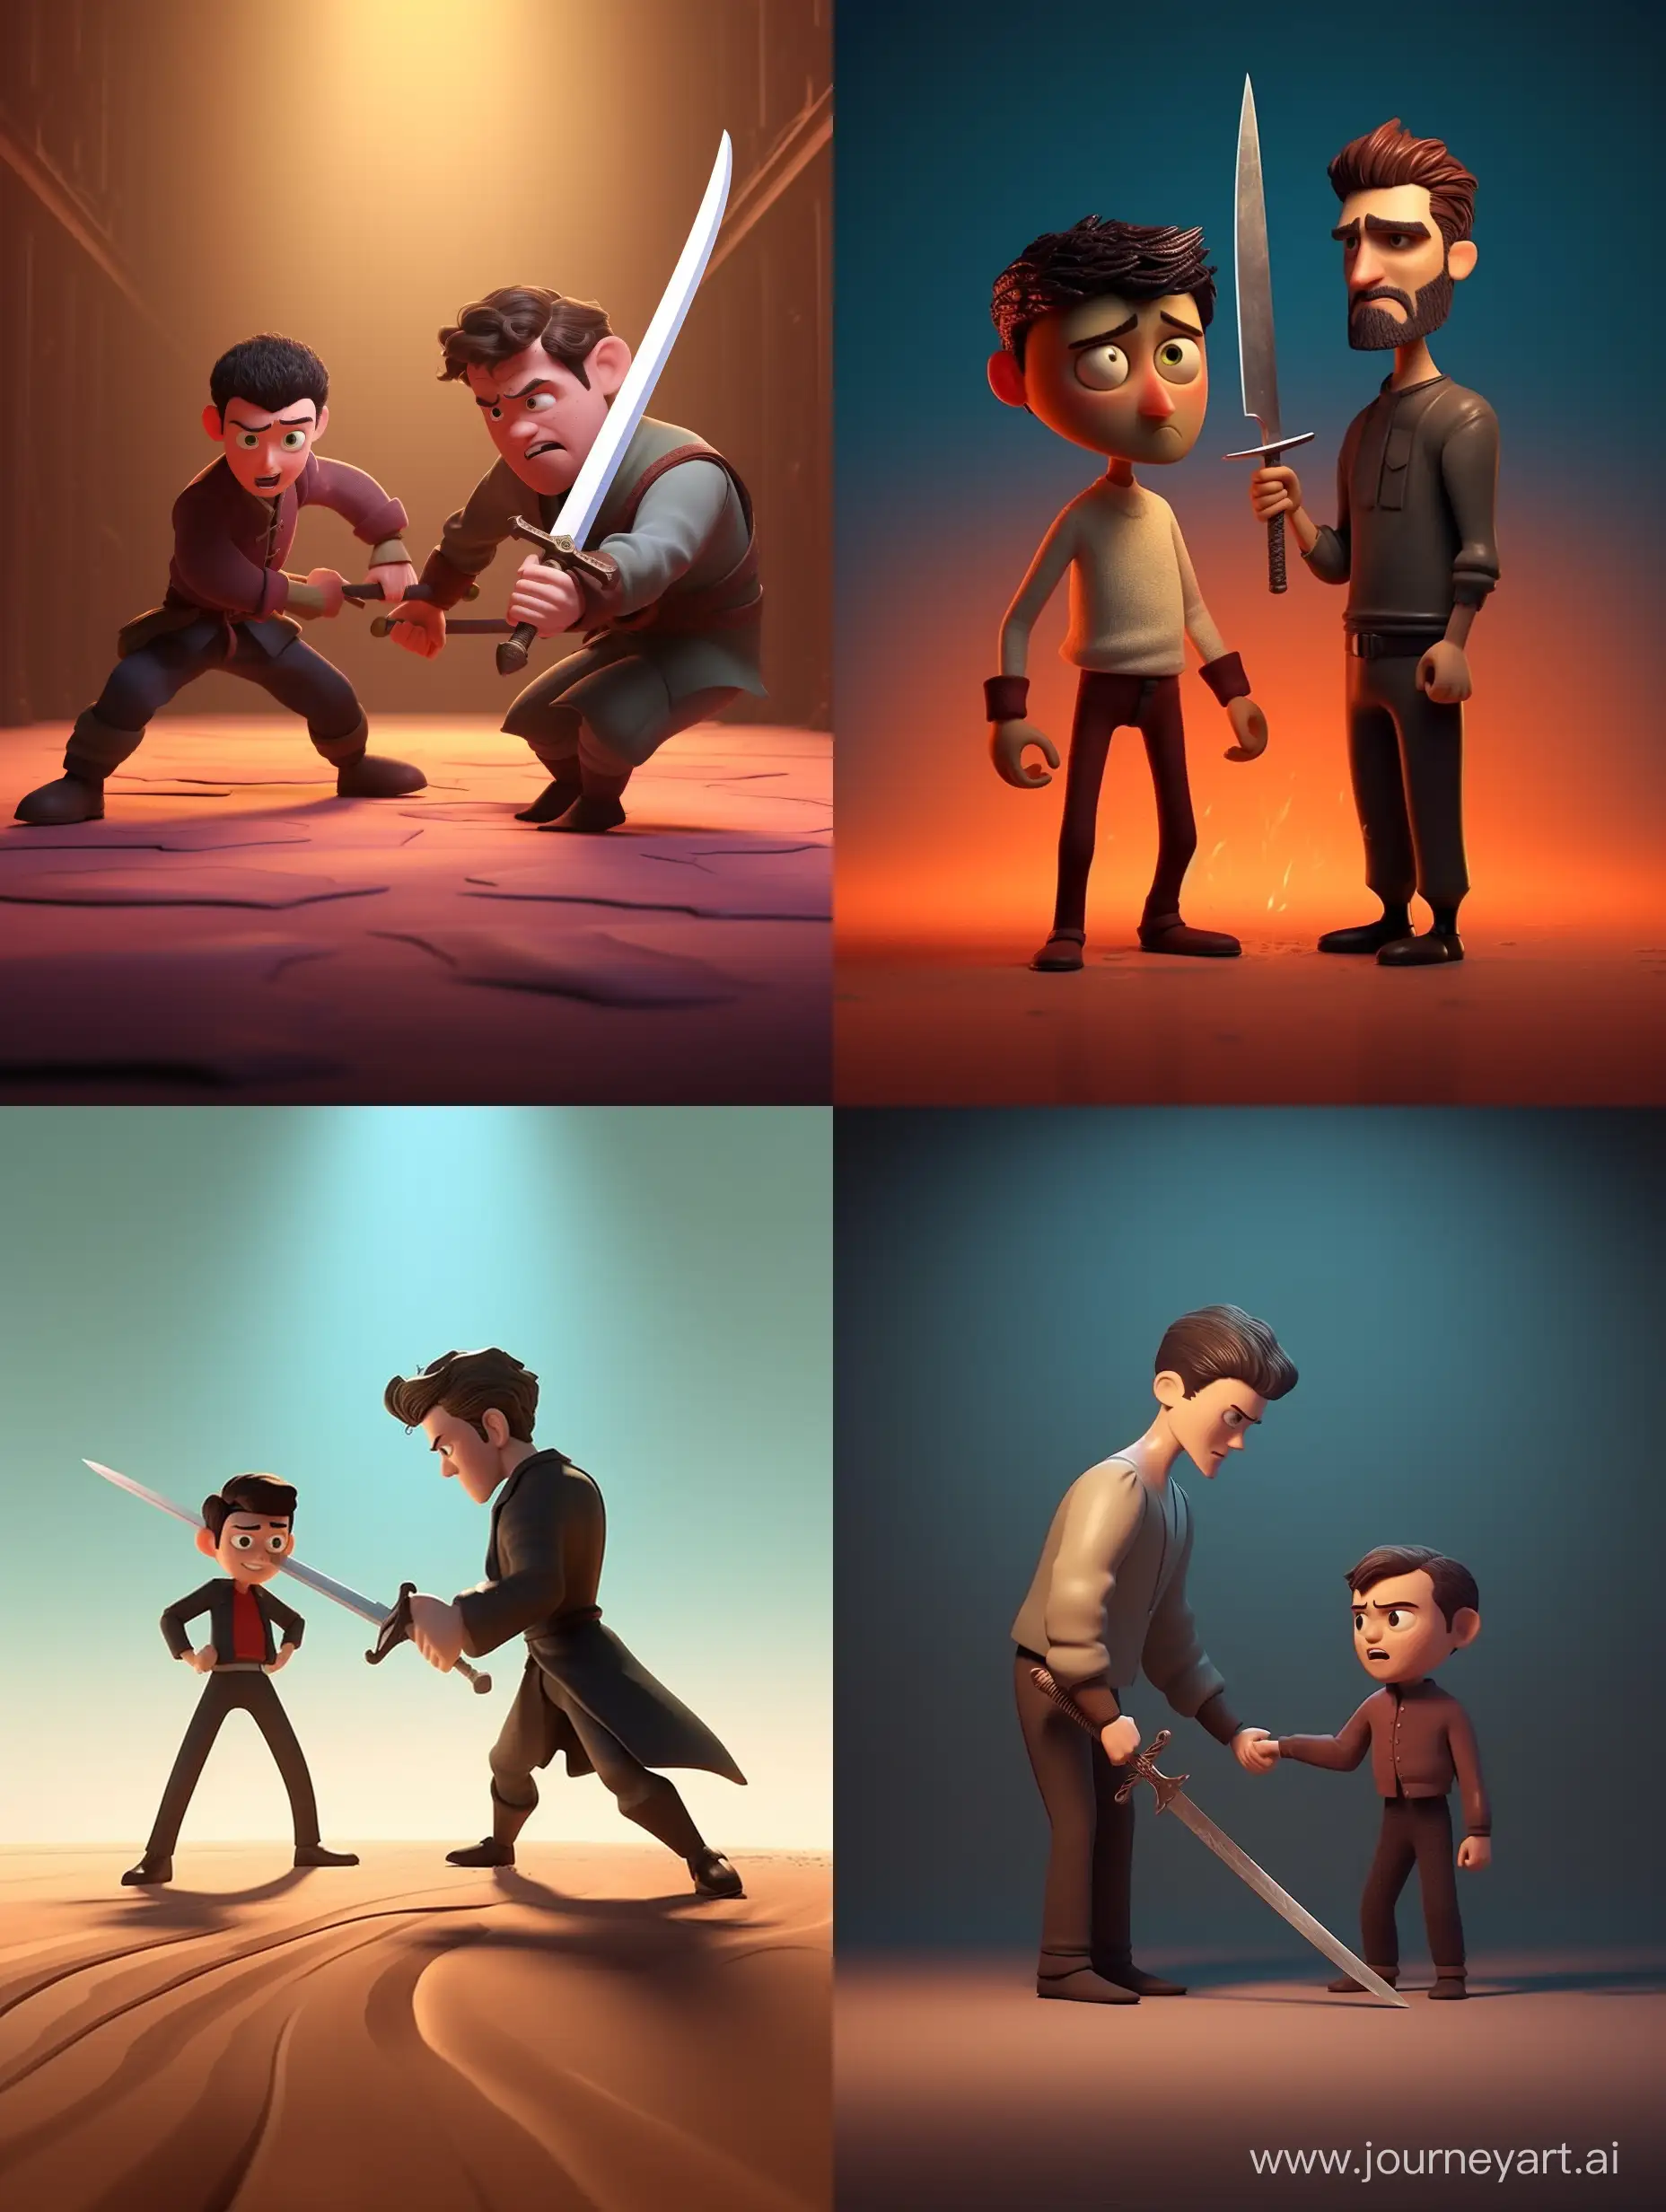 The man with the sword attacked the other man first. pixar style, 3d animation style